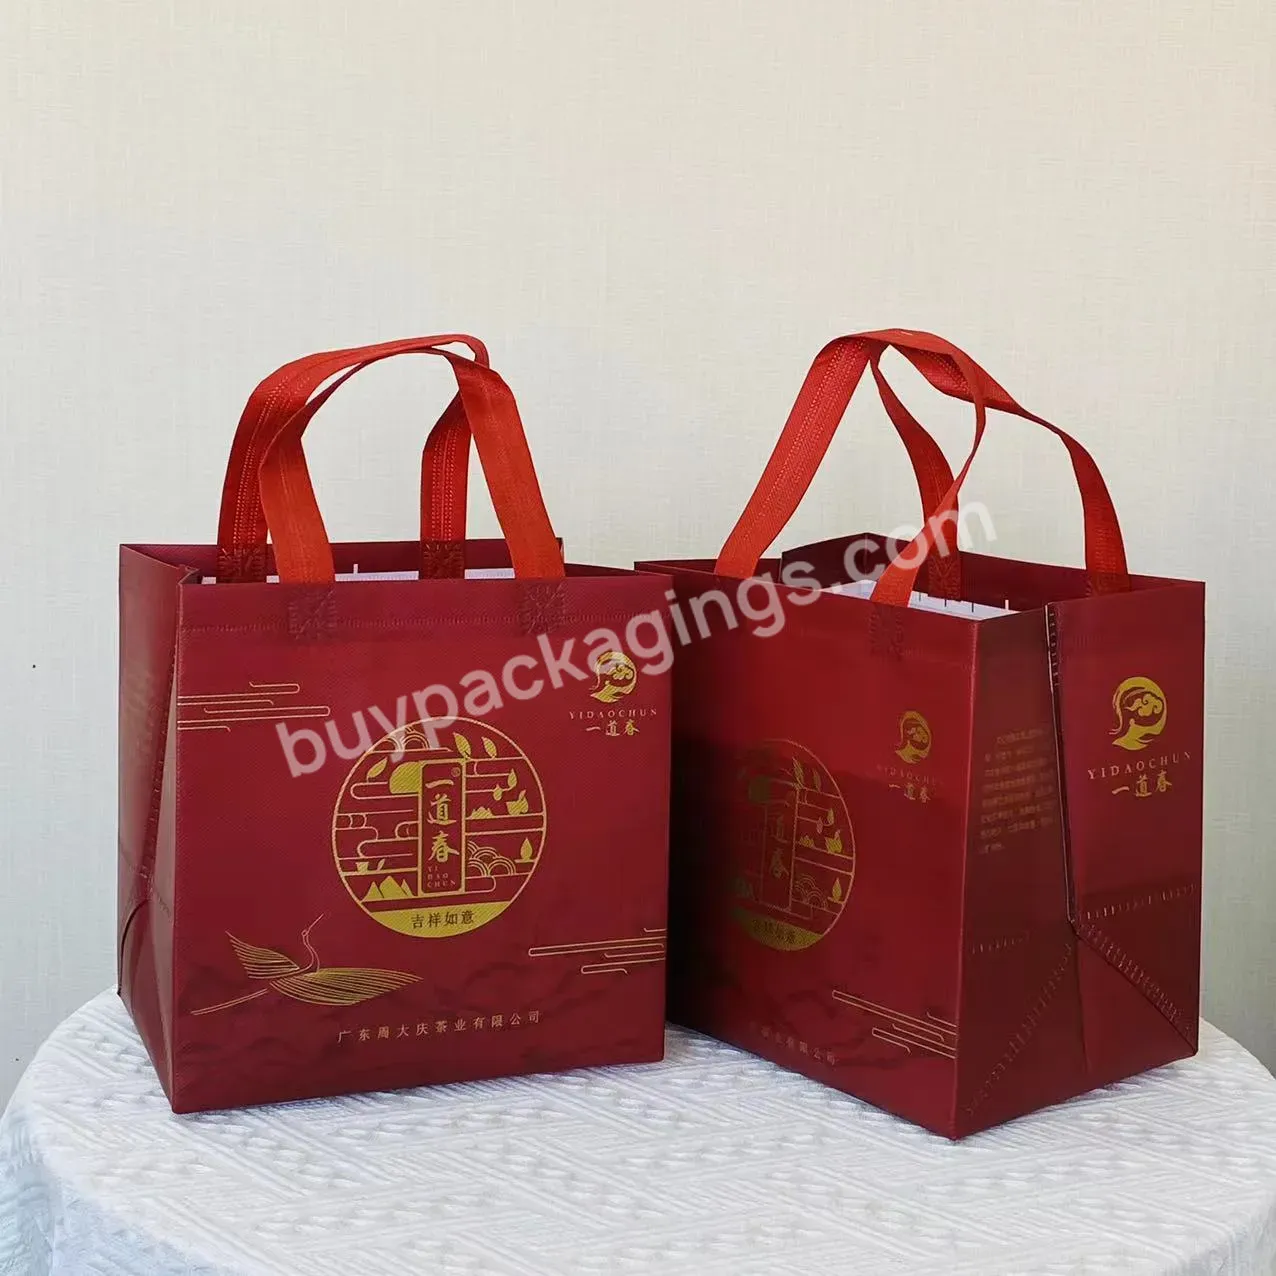 China Factory Eco Friendly Wholesale And Durable Foldable Waterproof Recycle Non Woven Food Bag With Handle - Buy Non Woven Food Shopping Bag With Handle,Non Woven Bag With Handle,Foldable Waterproof Non Woven Bag.